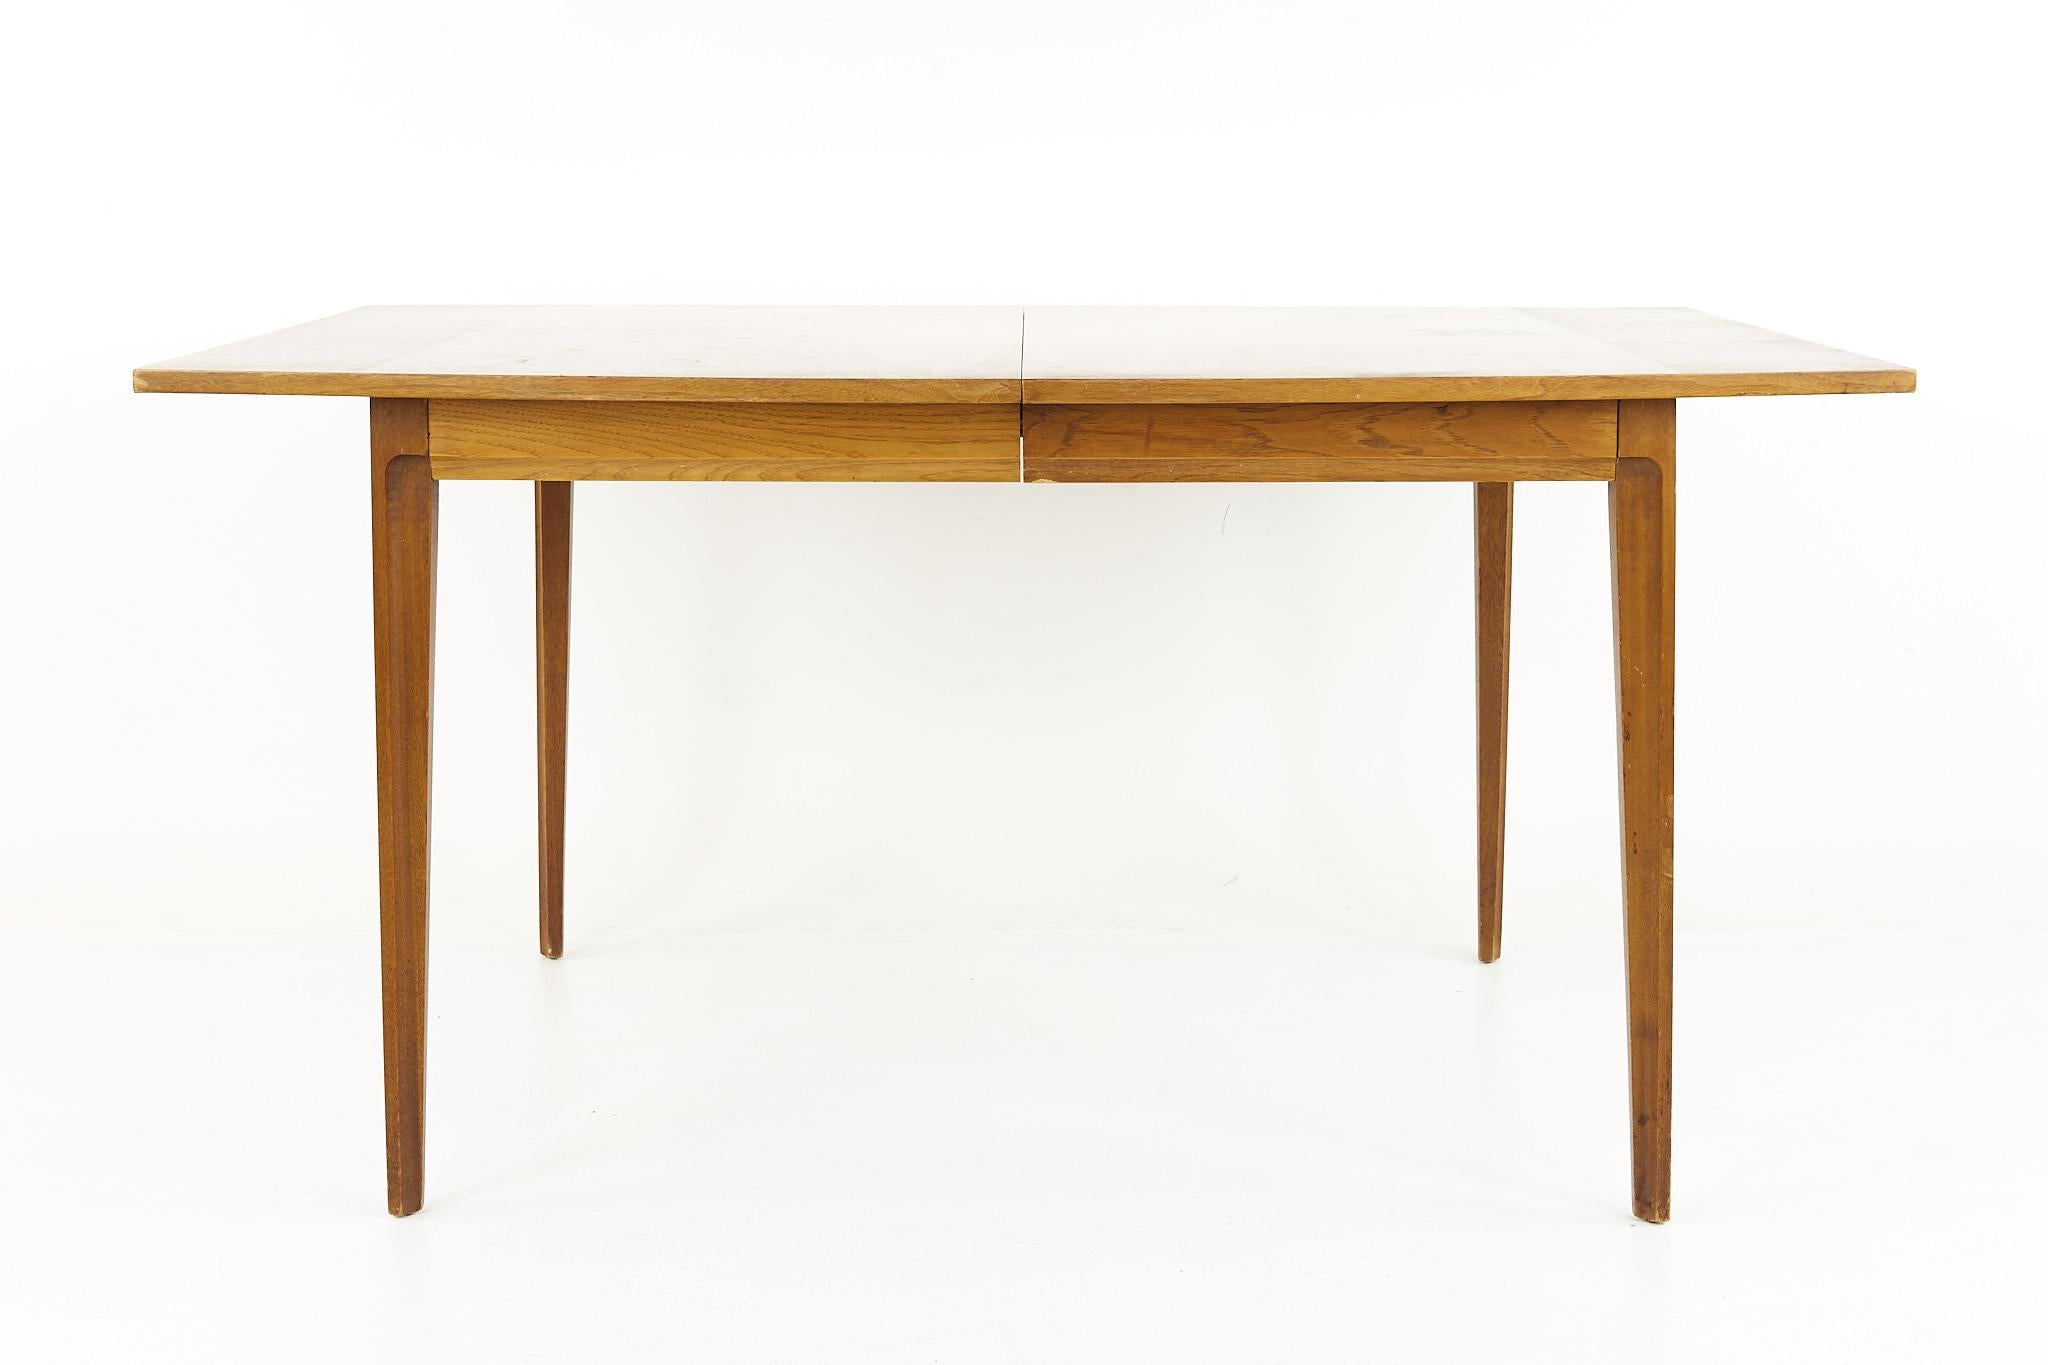 Broyhill forward '70 mid century walnut dining table with 1 leaf

This table measures: 60 wide x 40.5 deep x 30 inches high, with a chair clearance of 29 inches, the leaf measures 12 inches wide, making a maximum table width of 82 inches

All